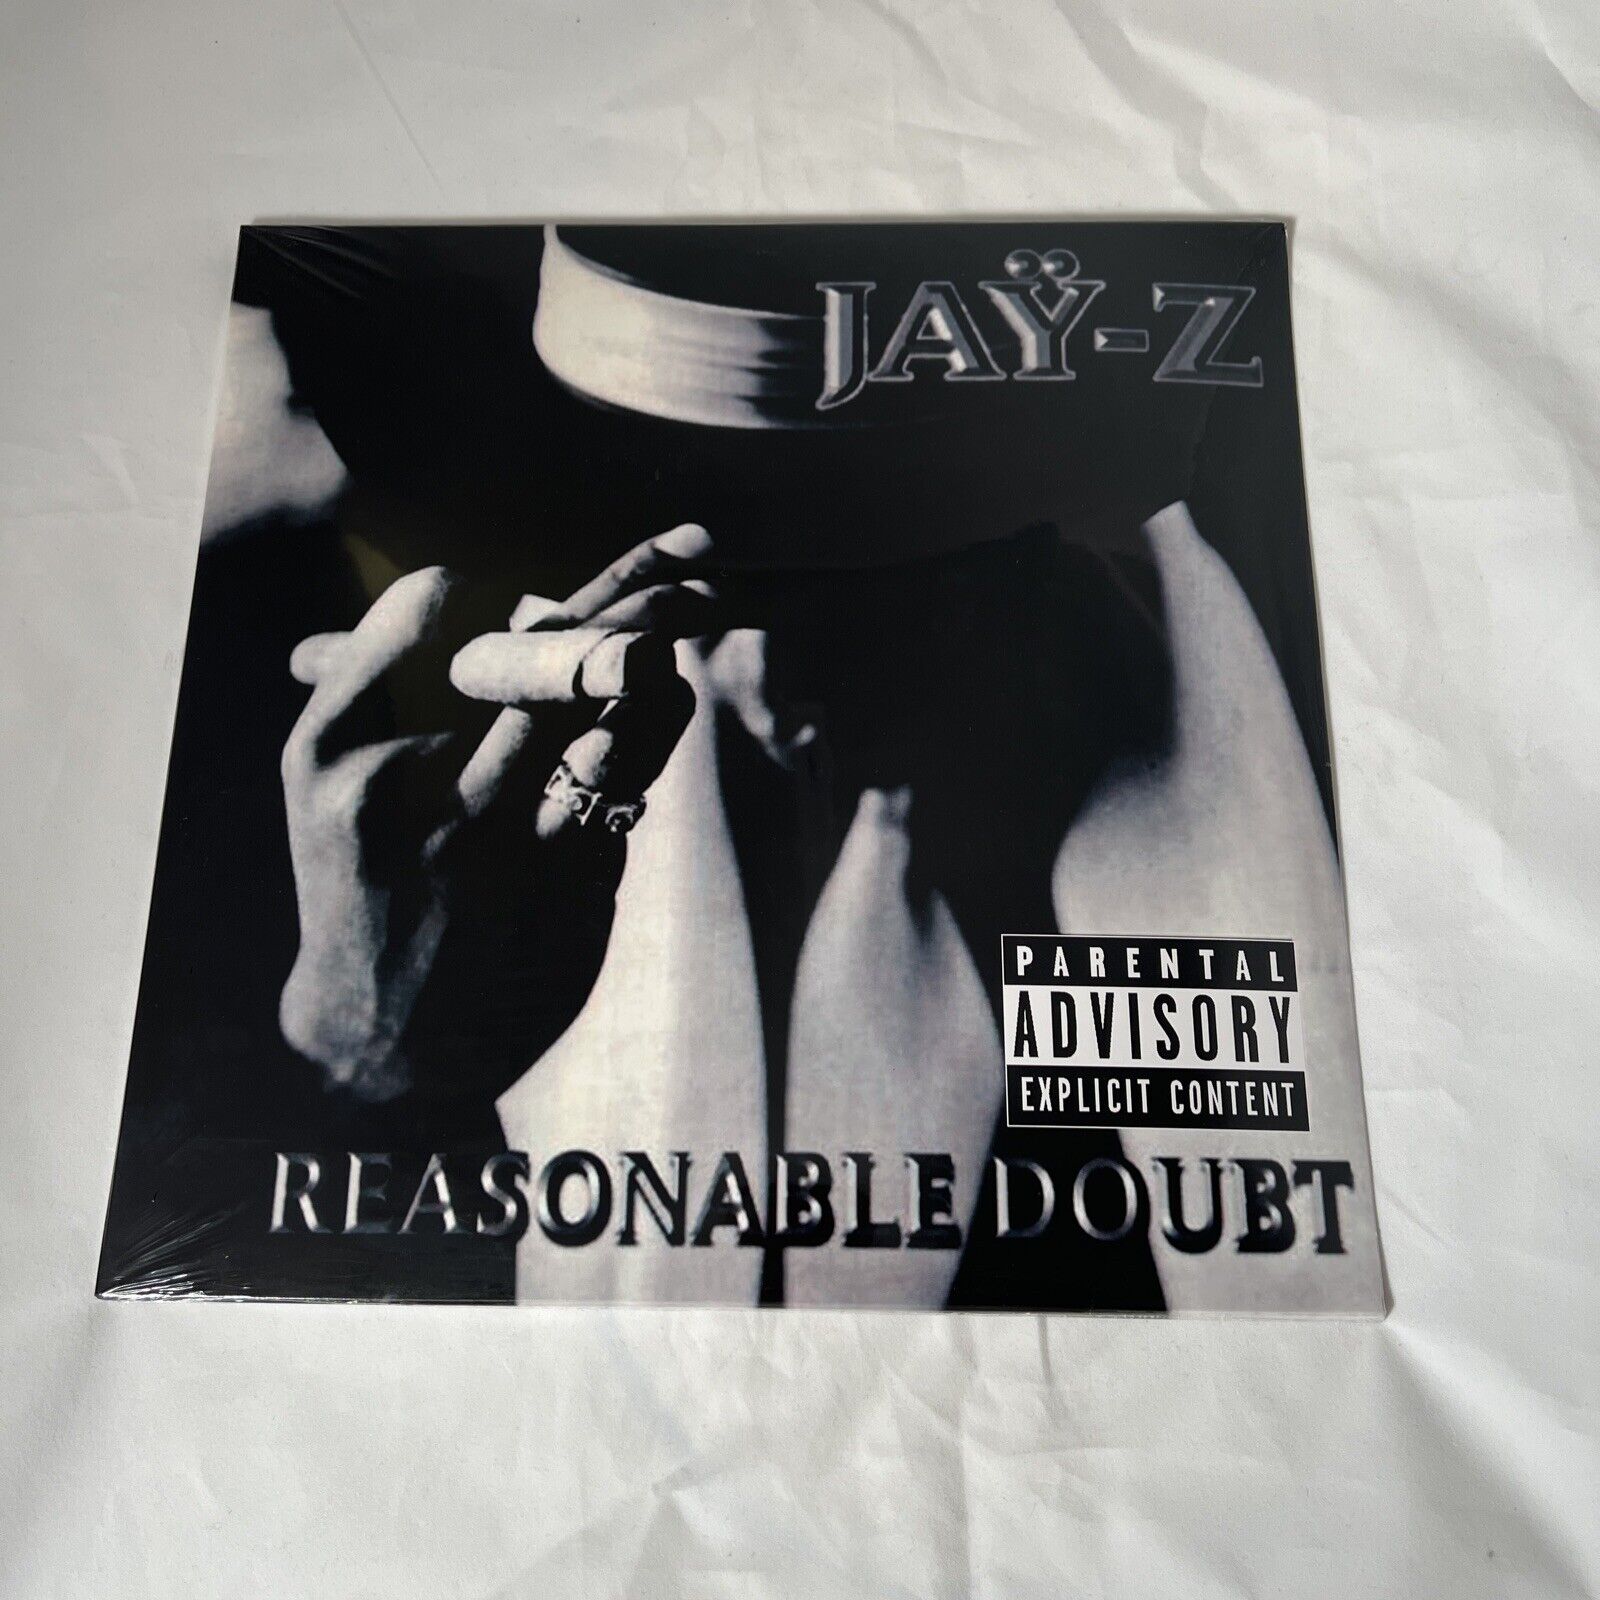 Reasonable Doubt [LP] by Jay-Z Vinyl Brand New Sealed 